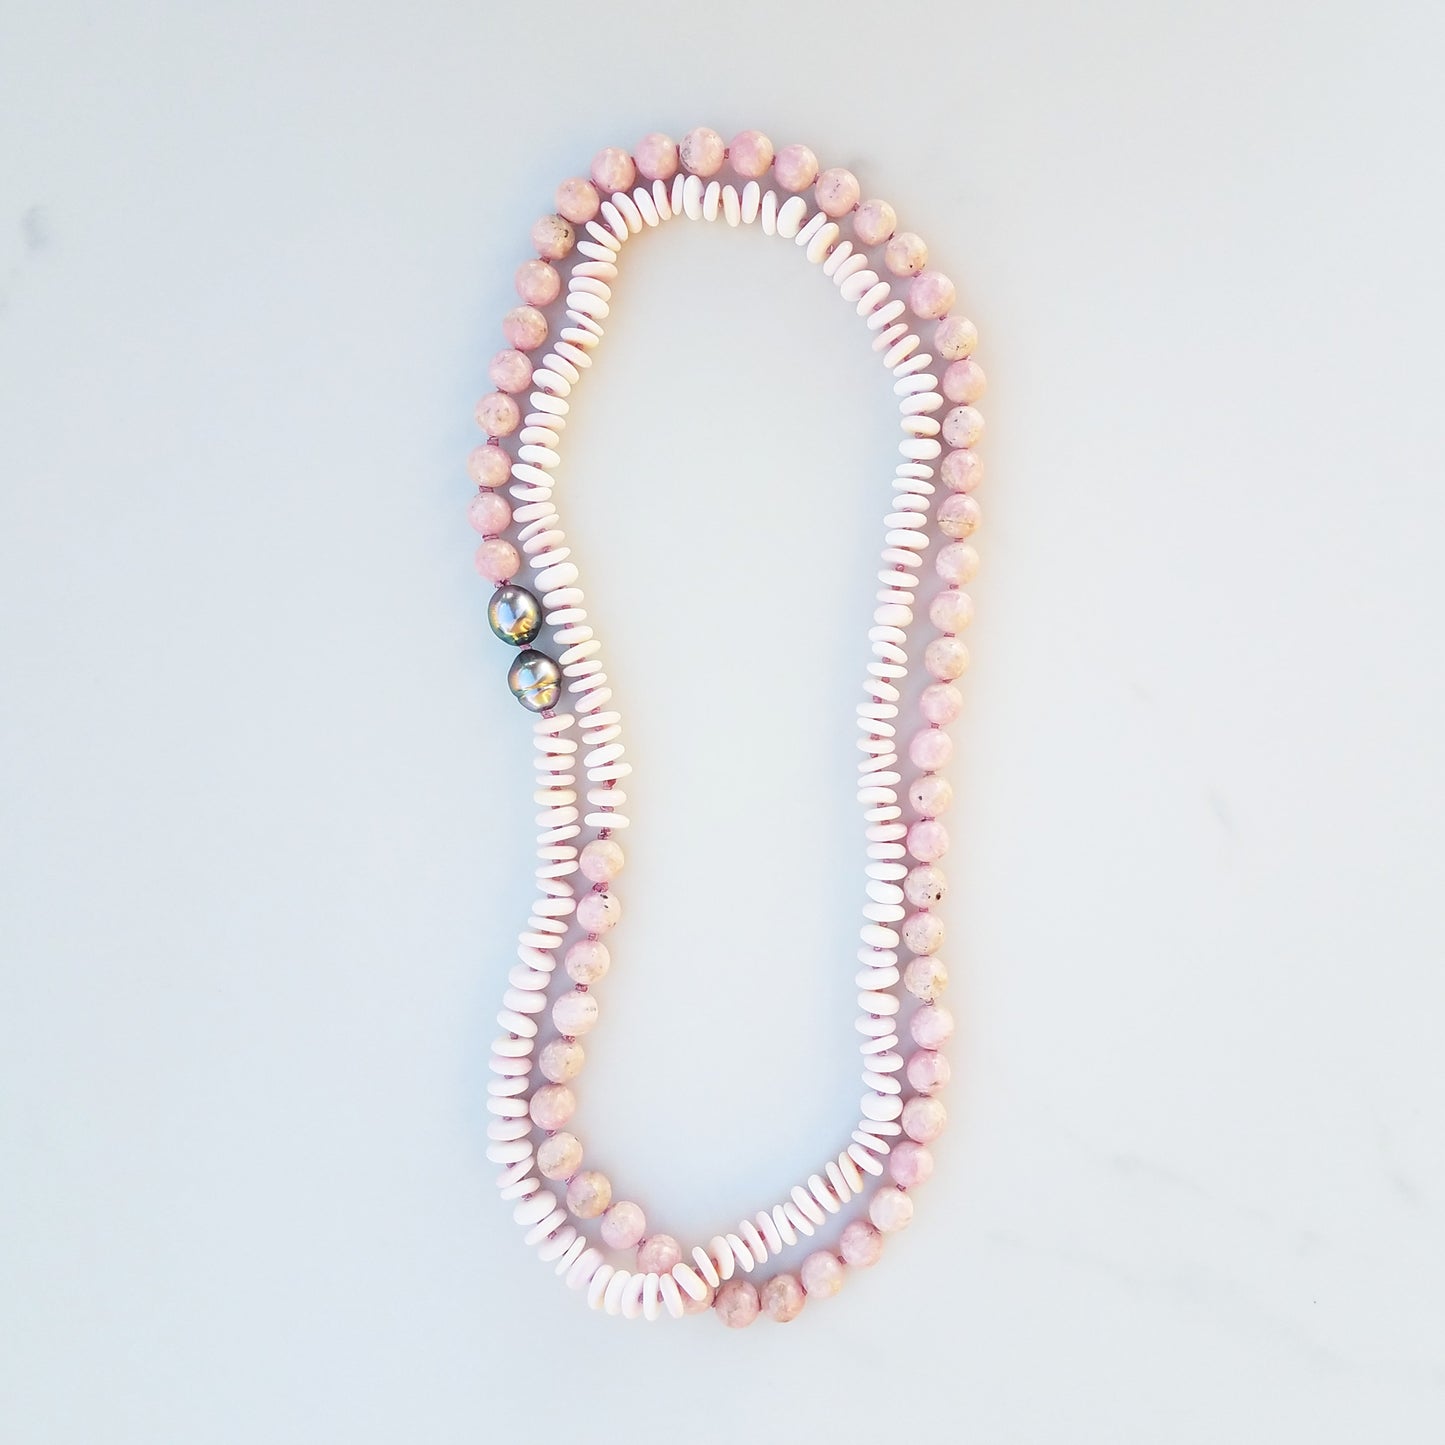 Conch Shell, Rhodochrosite, & Tahitian Pearl Helix Necklace